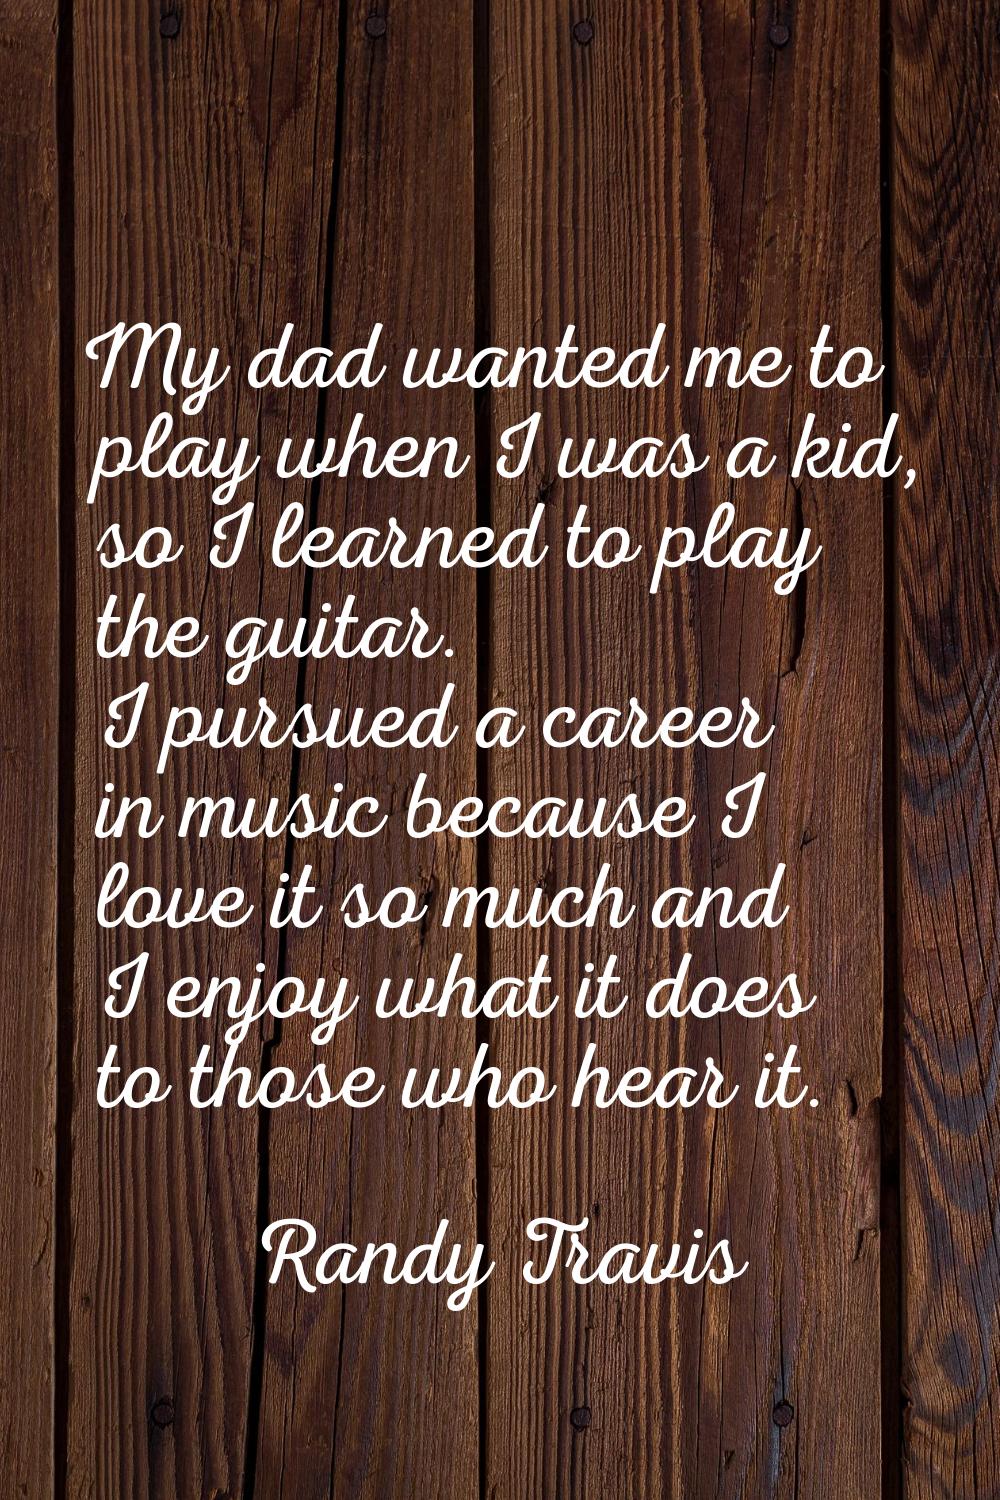 My dad wanted me to play when I was a kid, so I learned to play the guitar. I pursued a career in m